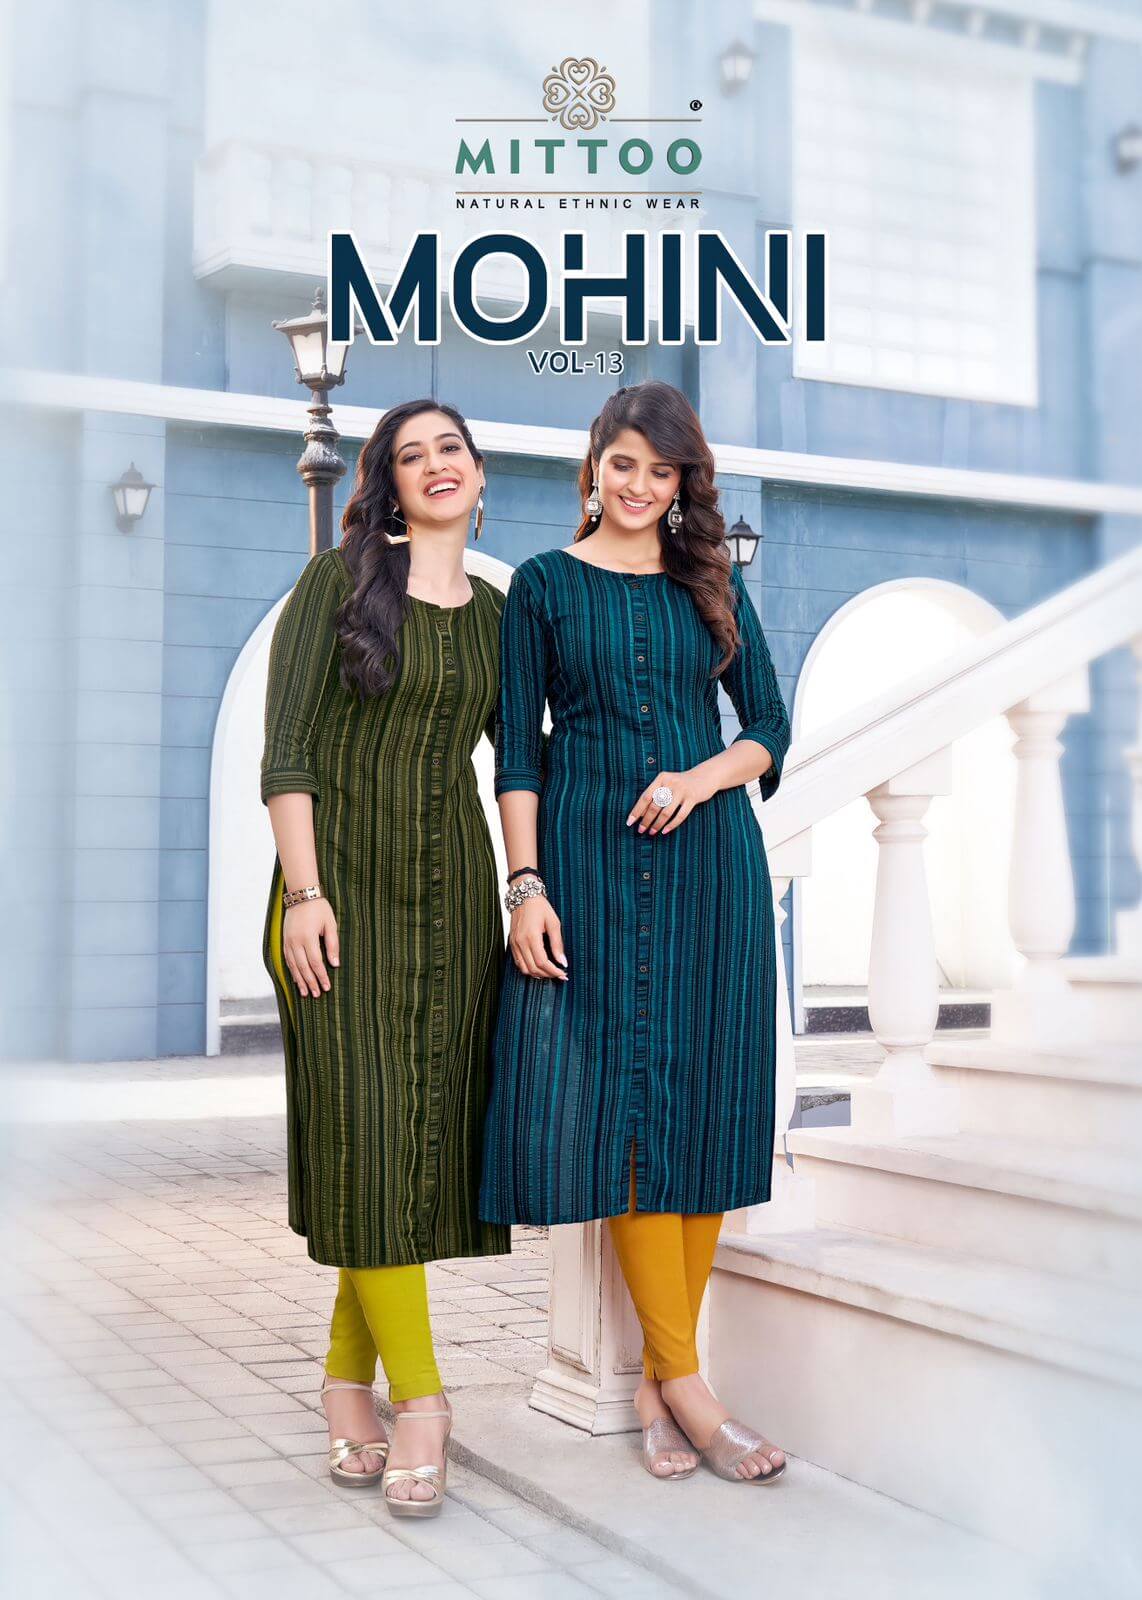 Mittoo Mohini vol 13 Kurti with Pant Catalog in Wholesale Price, Buy Mittoo Mohini vol 13 Kurti with Pant Full Catalog in Wholesale Price Online From Aarvee Creation